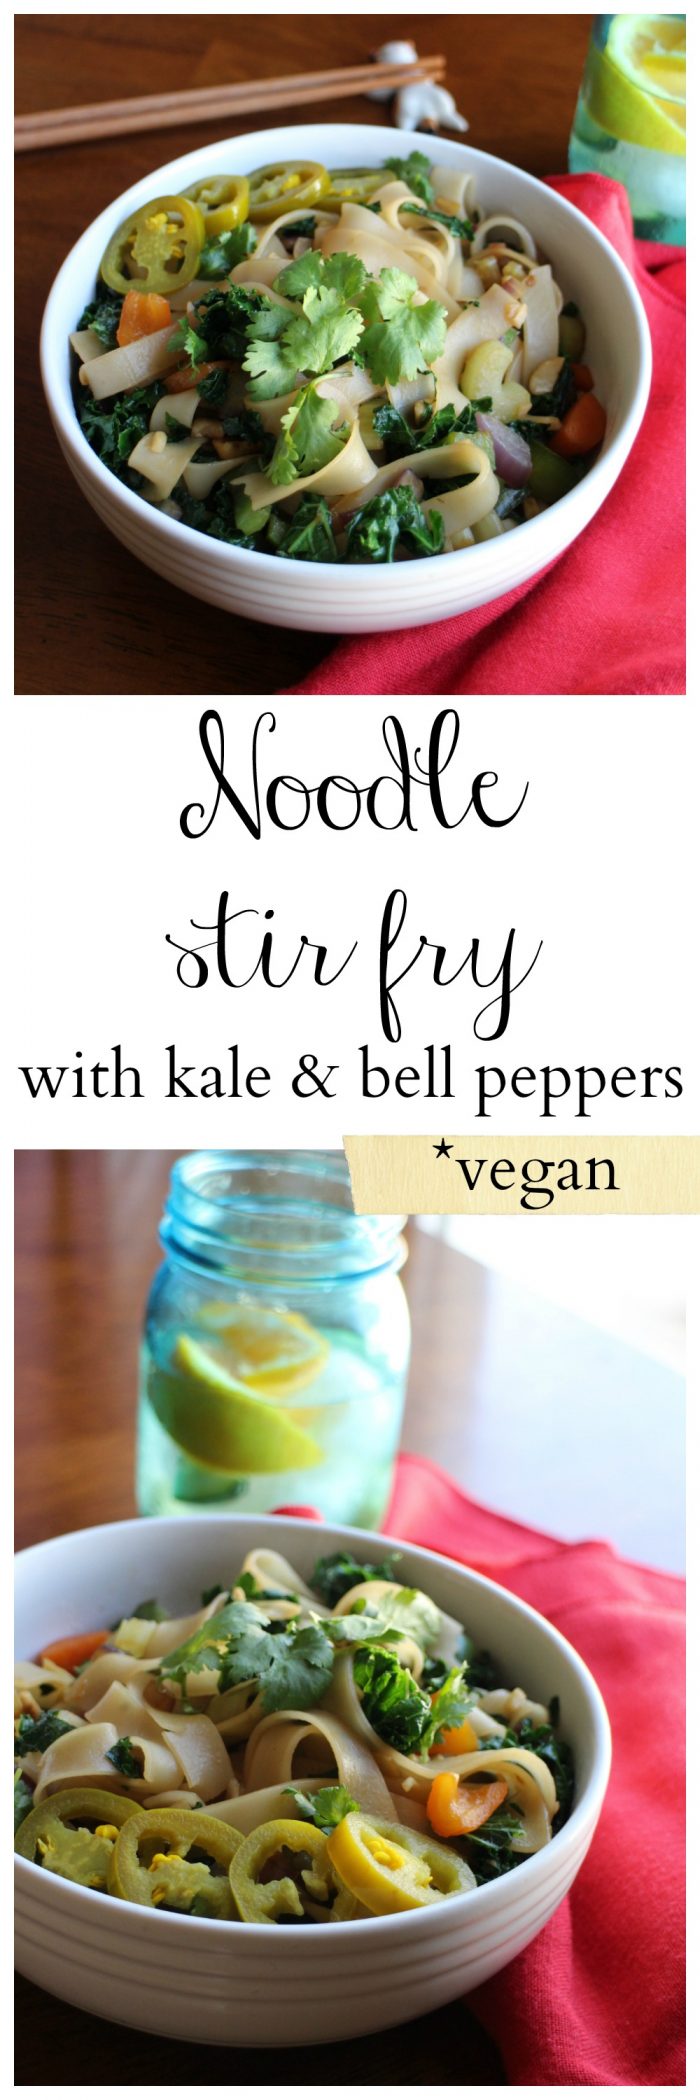 This vegan noodle stir fry is packed with vegetables like kale and bell pepper. Top it with sriracha & pickled jalapeno slices for some added heat. Vegan. | cadryskitchen.com